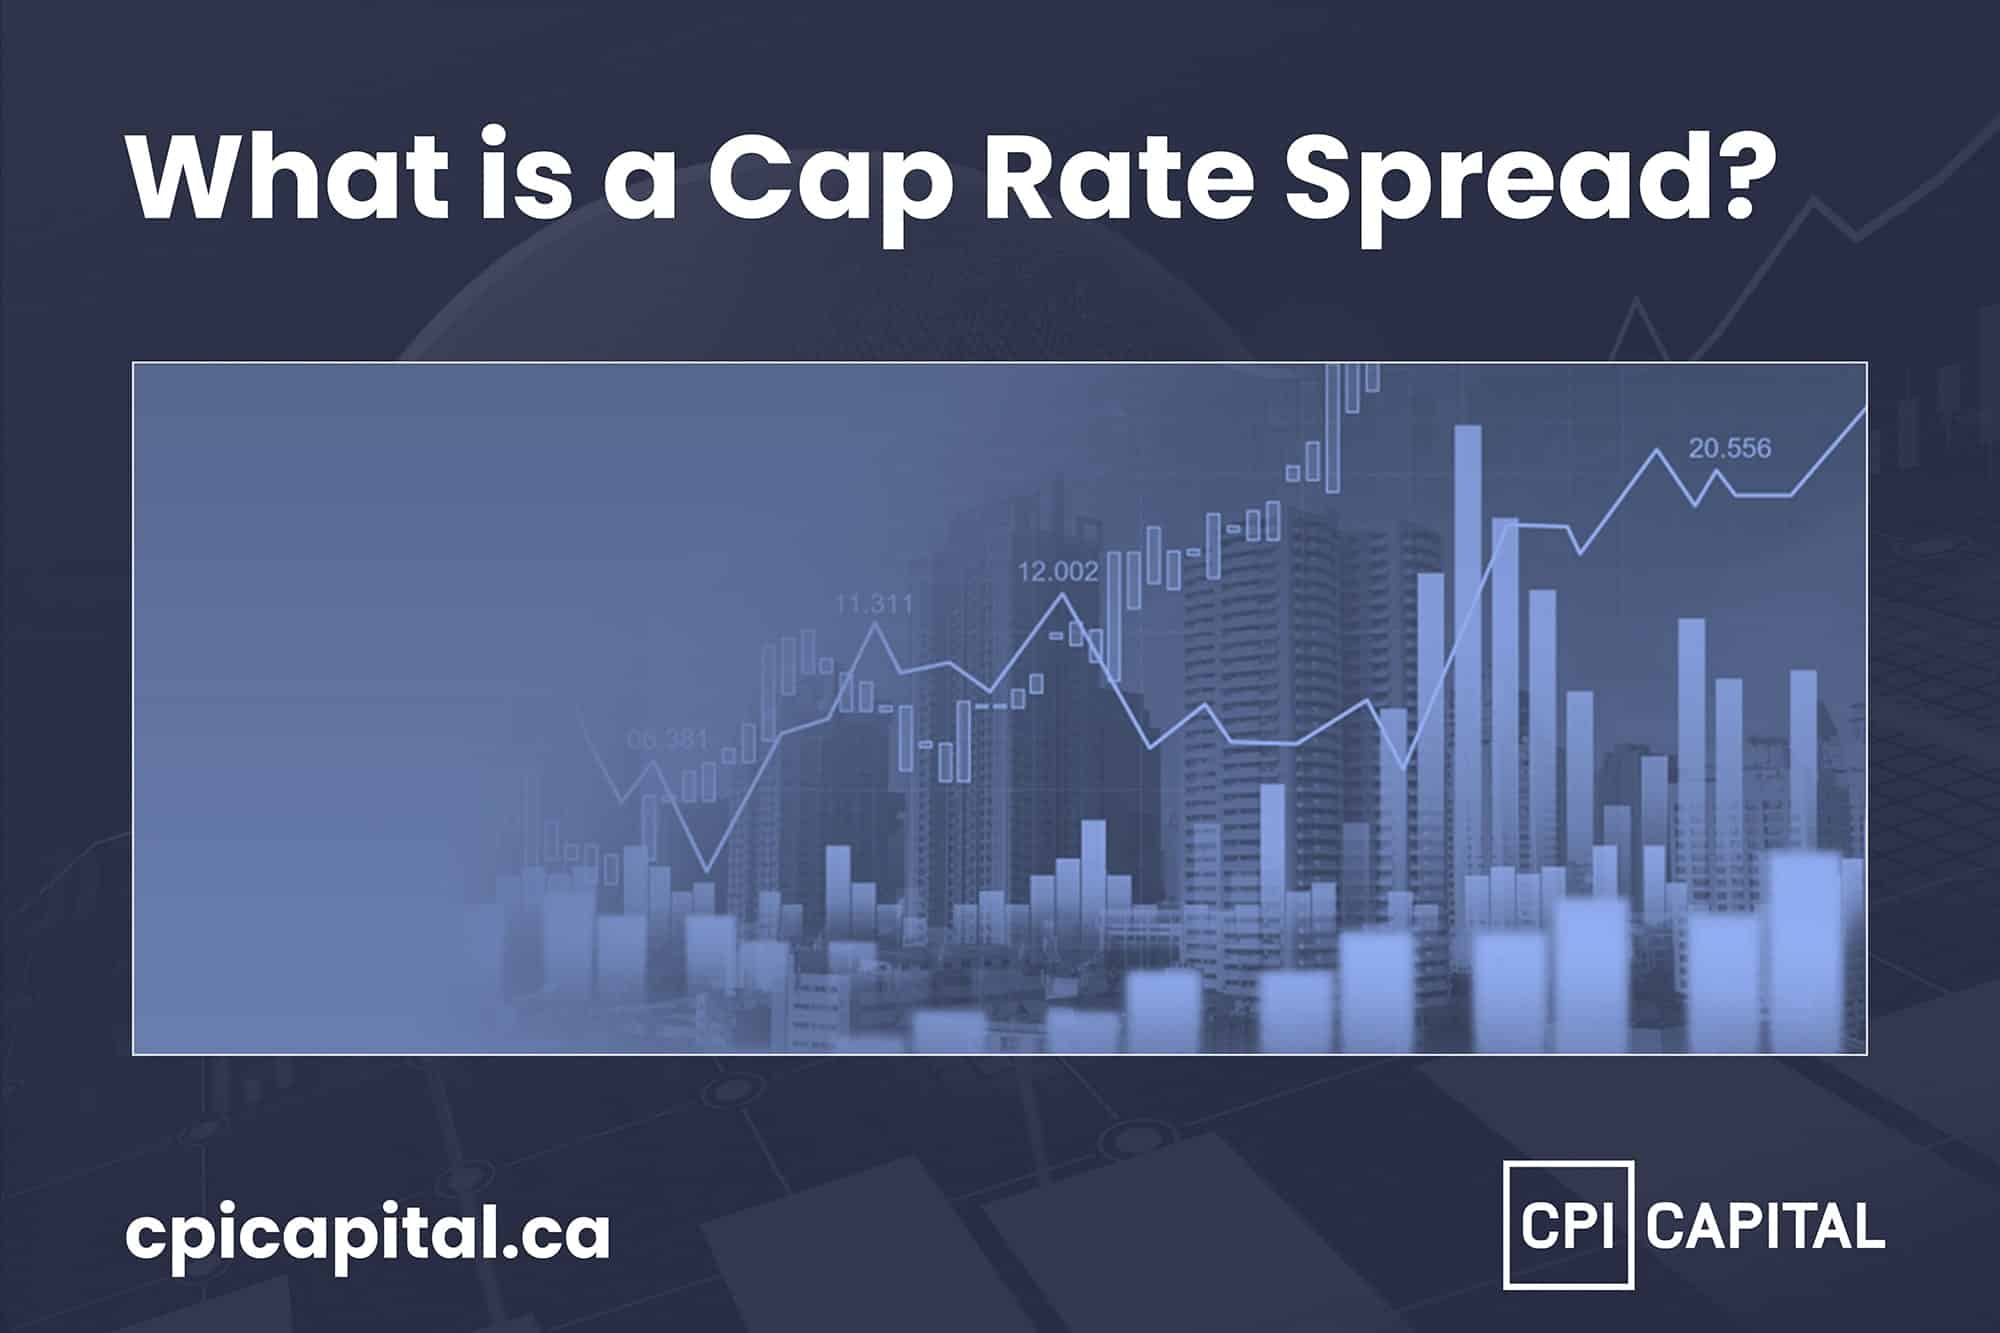 What is a cap rate spread?